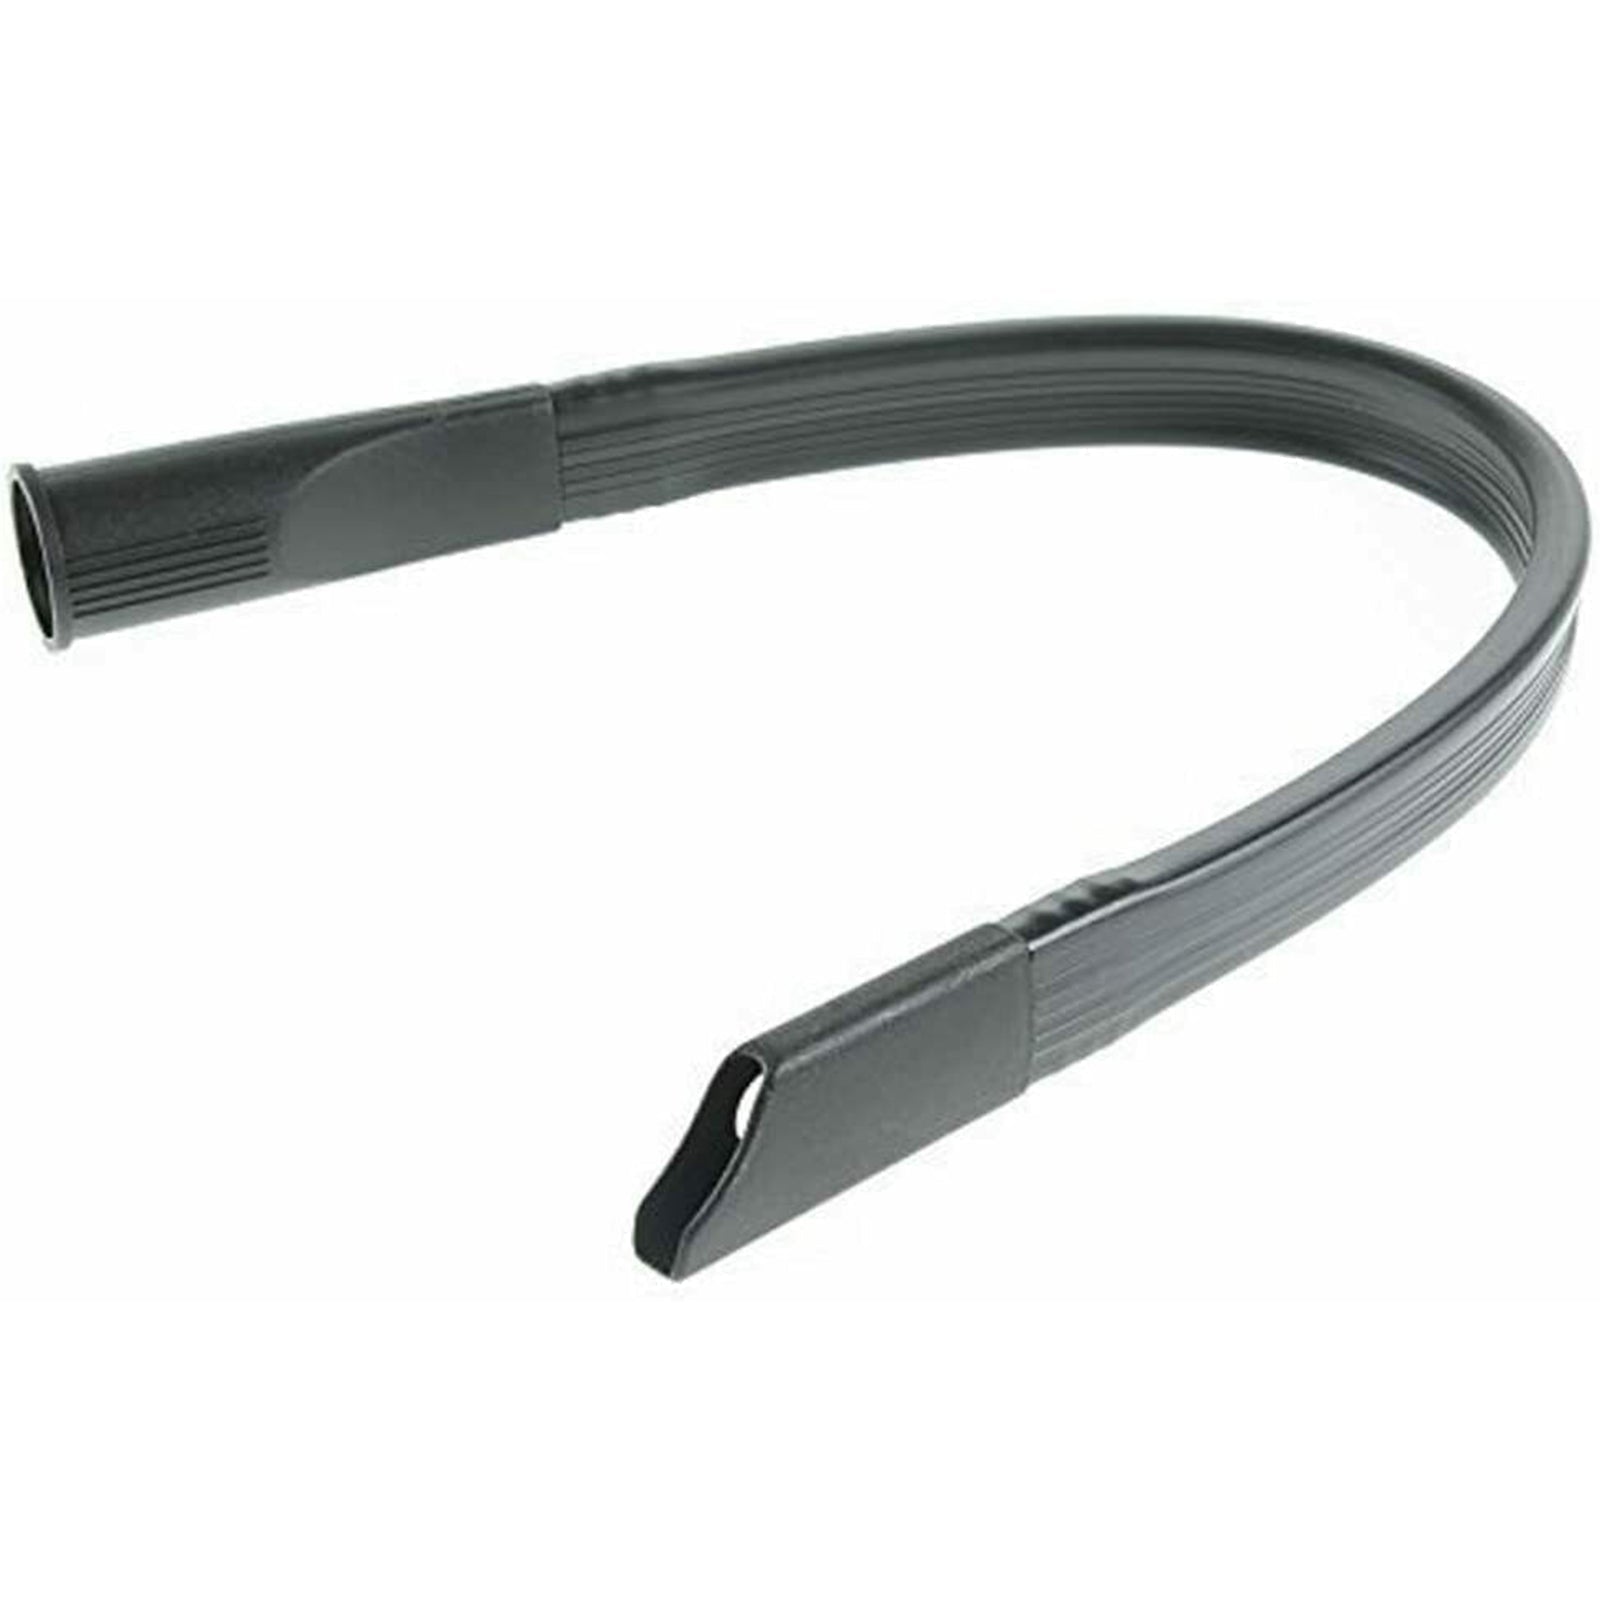 Flexible Crevice Tool Extra Long compatible with VAX Vacuum Cleaner (32mm)